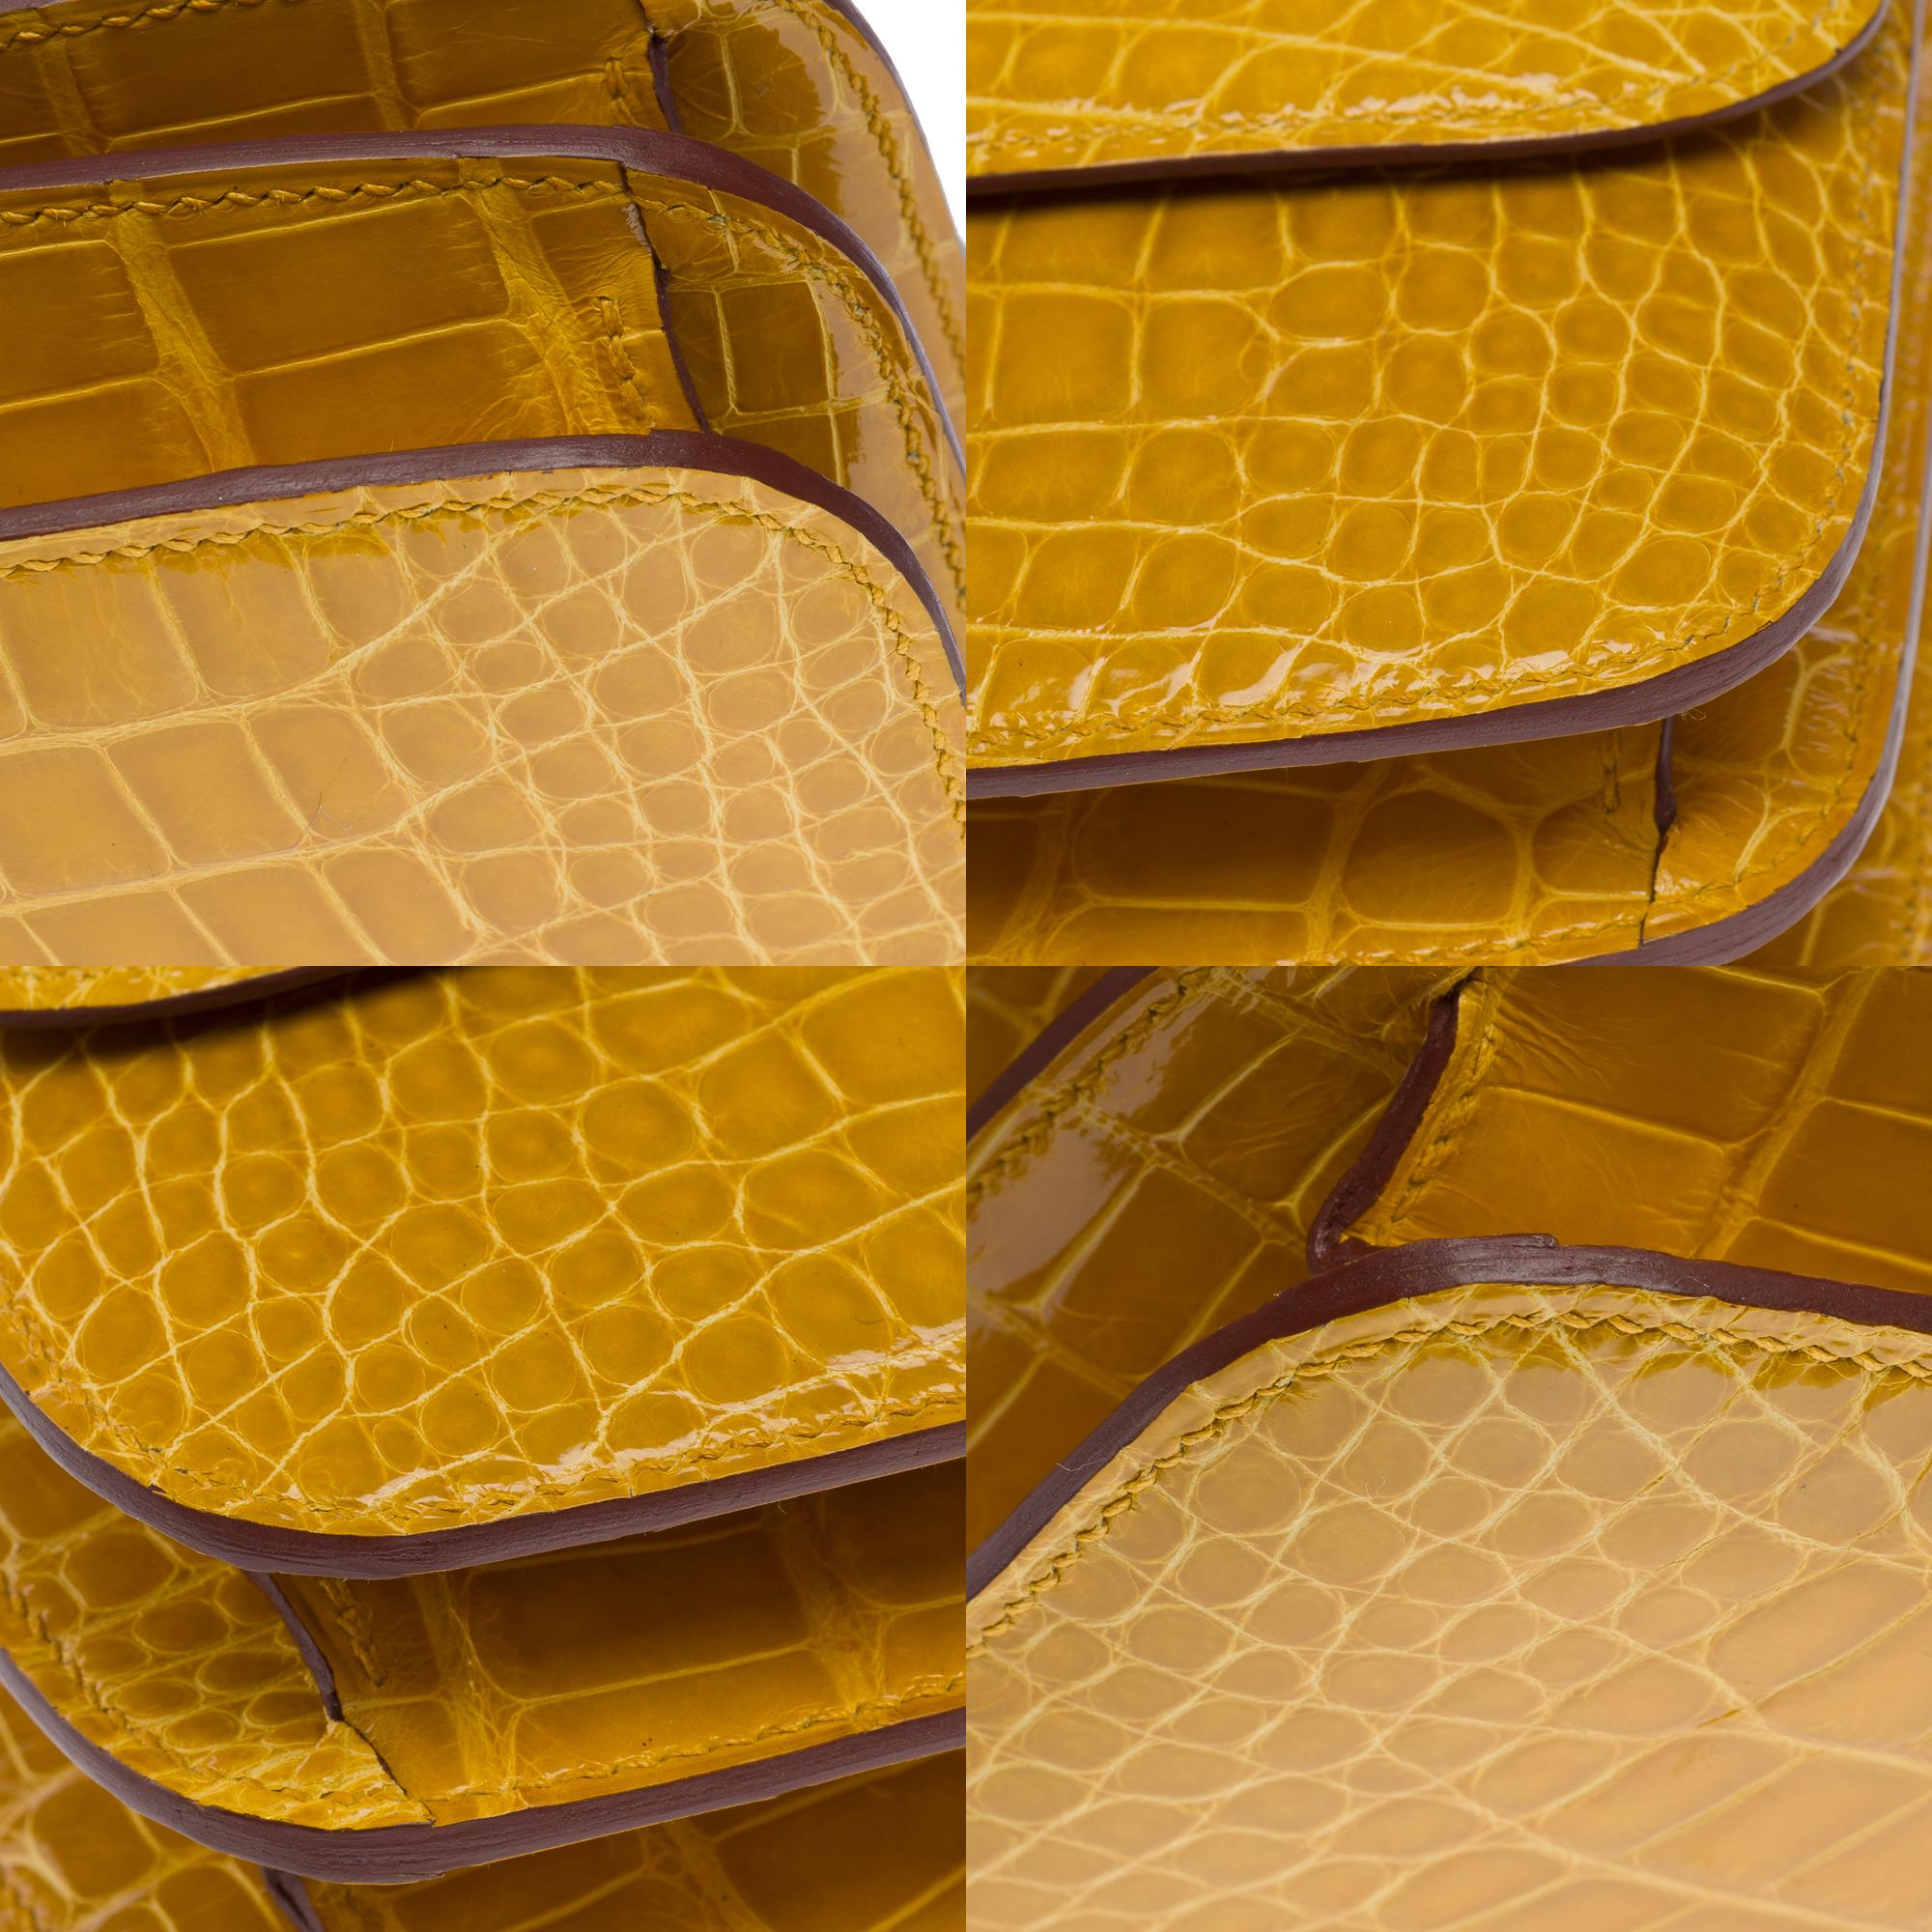 New Rare Hermes 2002 shoulder bag in Ambre Yellow Alligator leather, SHW For Sale 8